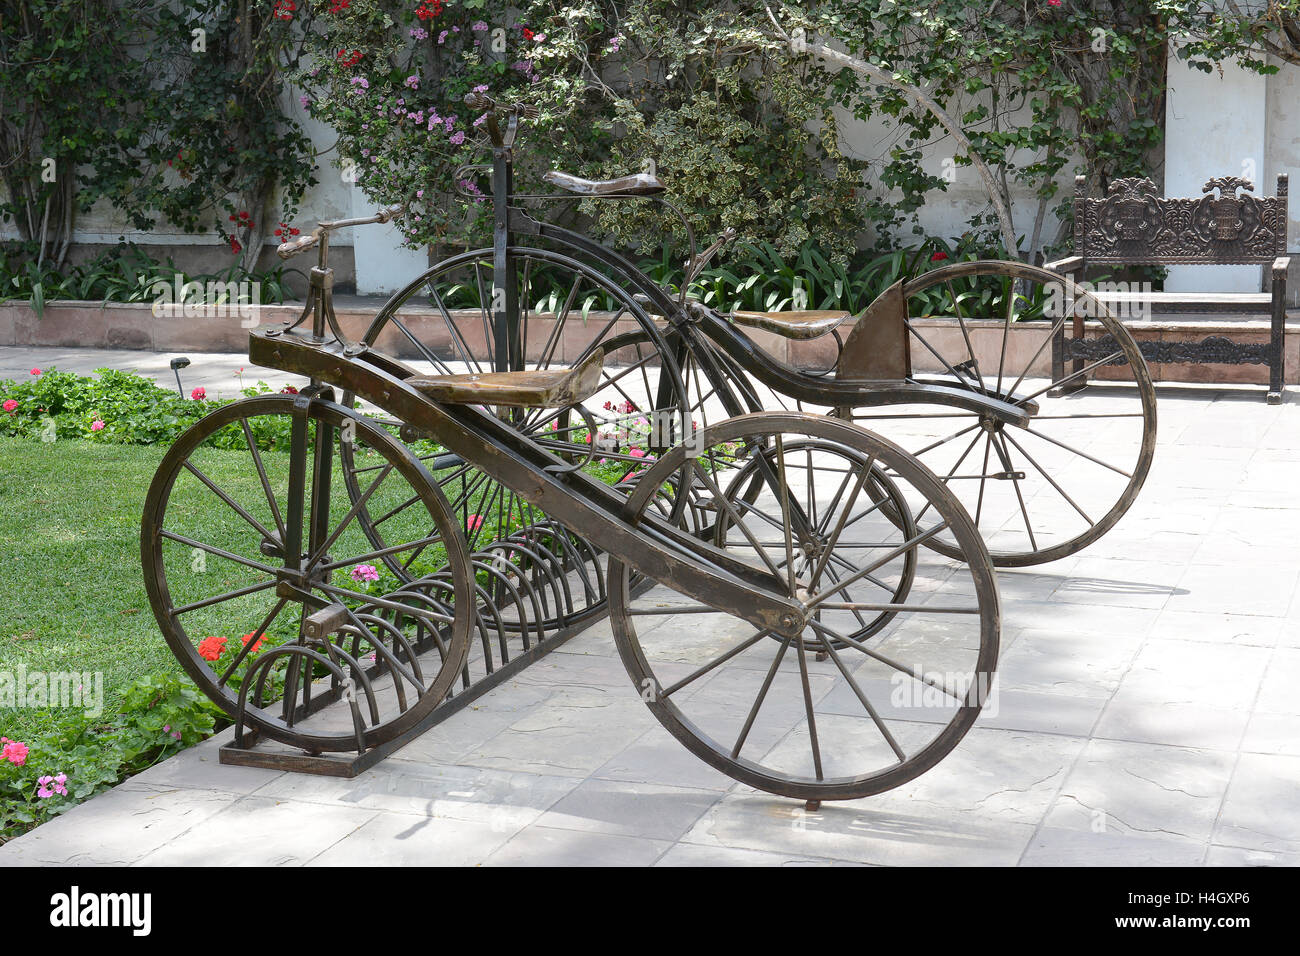 BARRANCO, PERU - OCTOBER 18, 2015: Pedro de Osma Museum Bicycle Sculptures. Opening in 1988 the museum, in the suburbs of Lima, Stock Photo